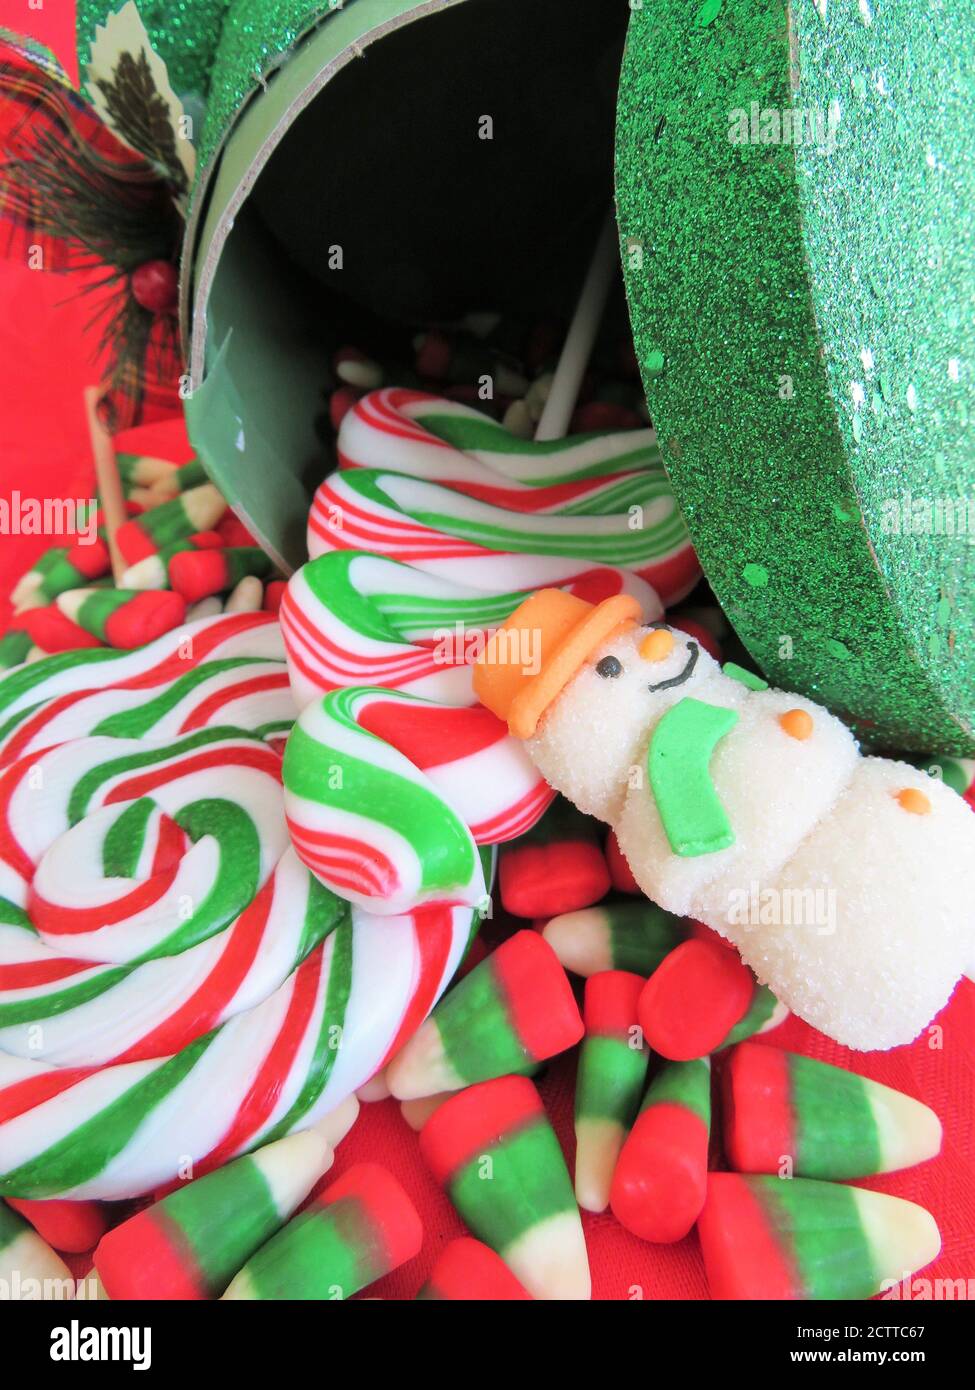 Christmas candy variety in red, white, and green Stock Photo